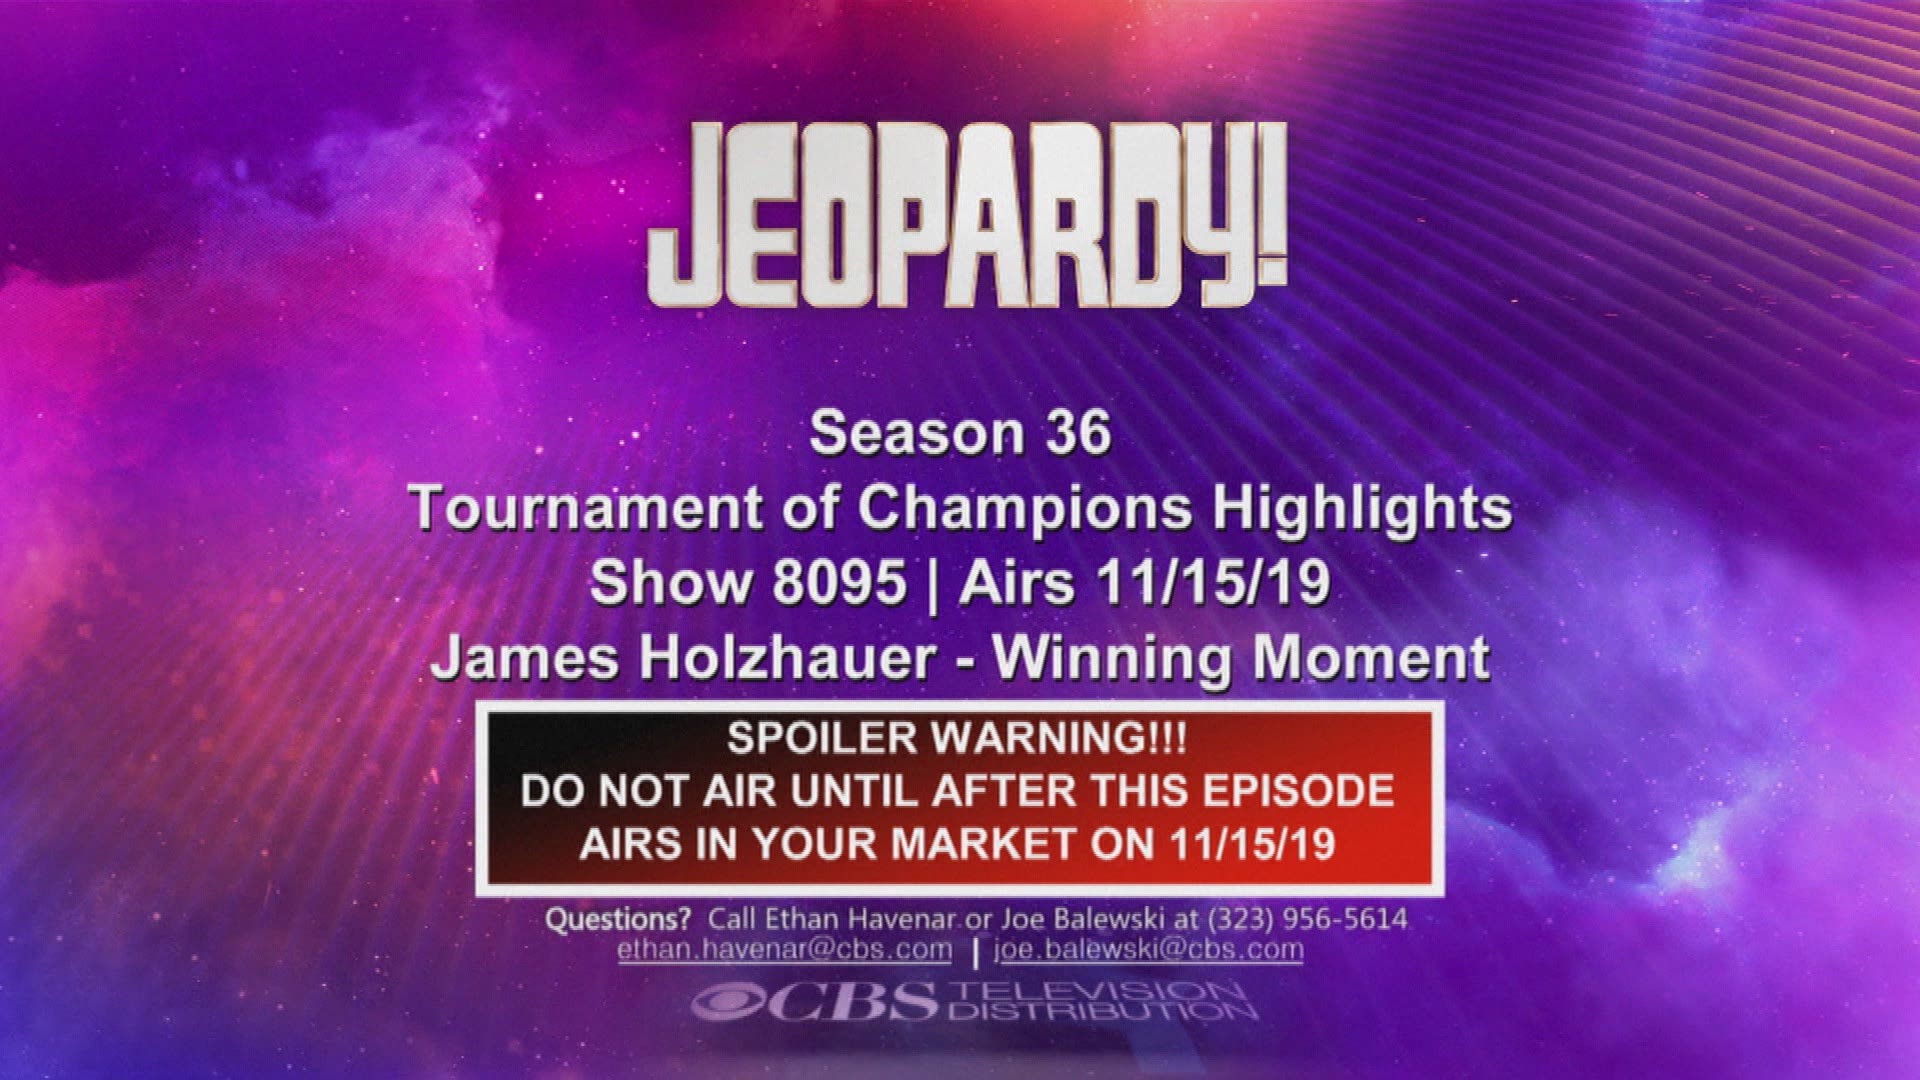 “JEOPARDY! James” Holzhauer wins the 2019 Tournament of Champions.